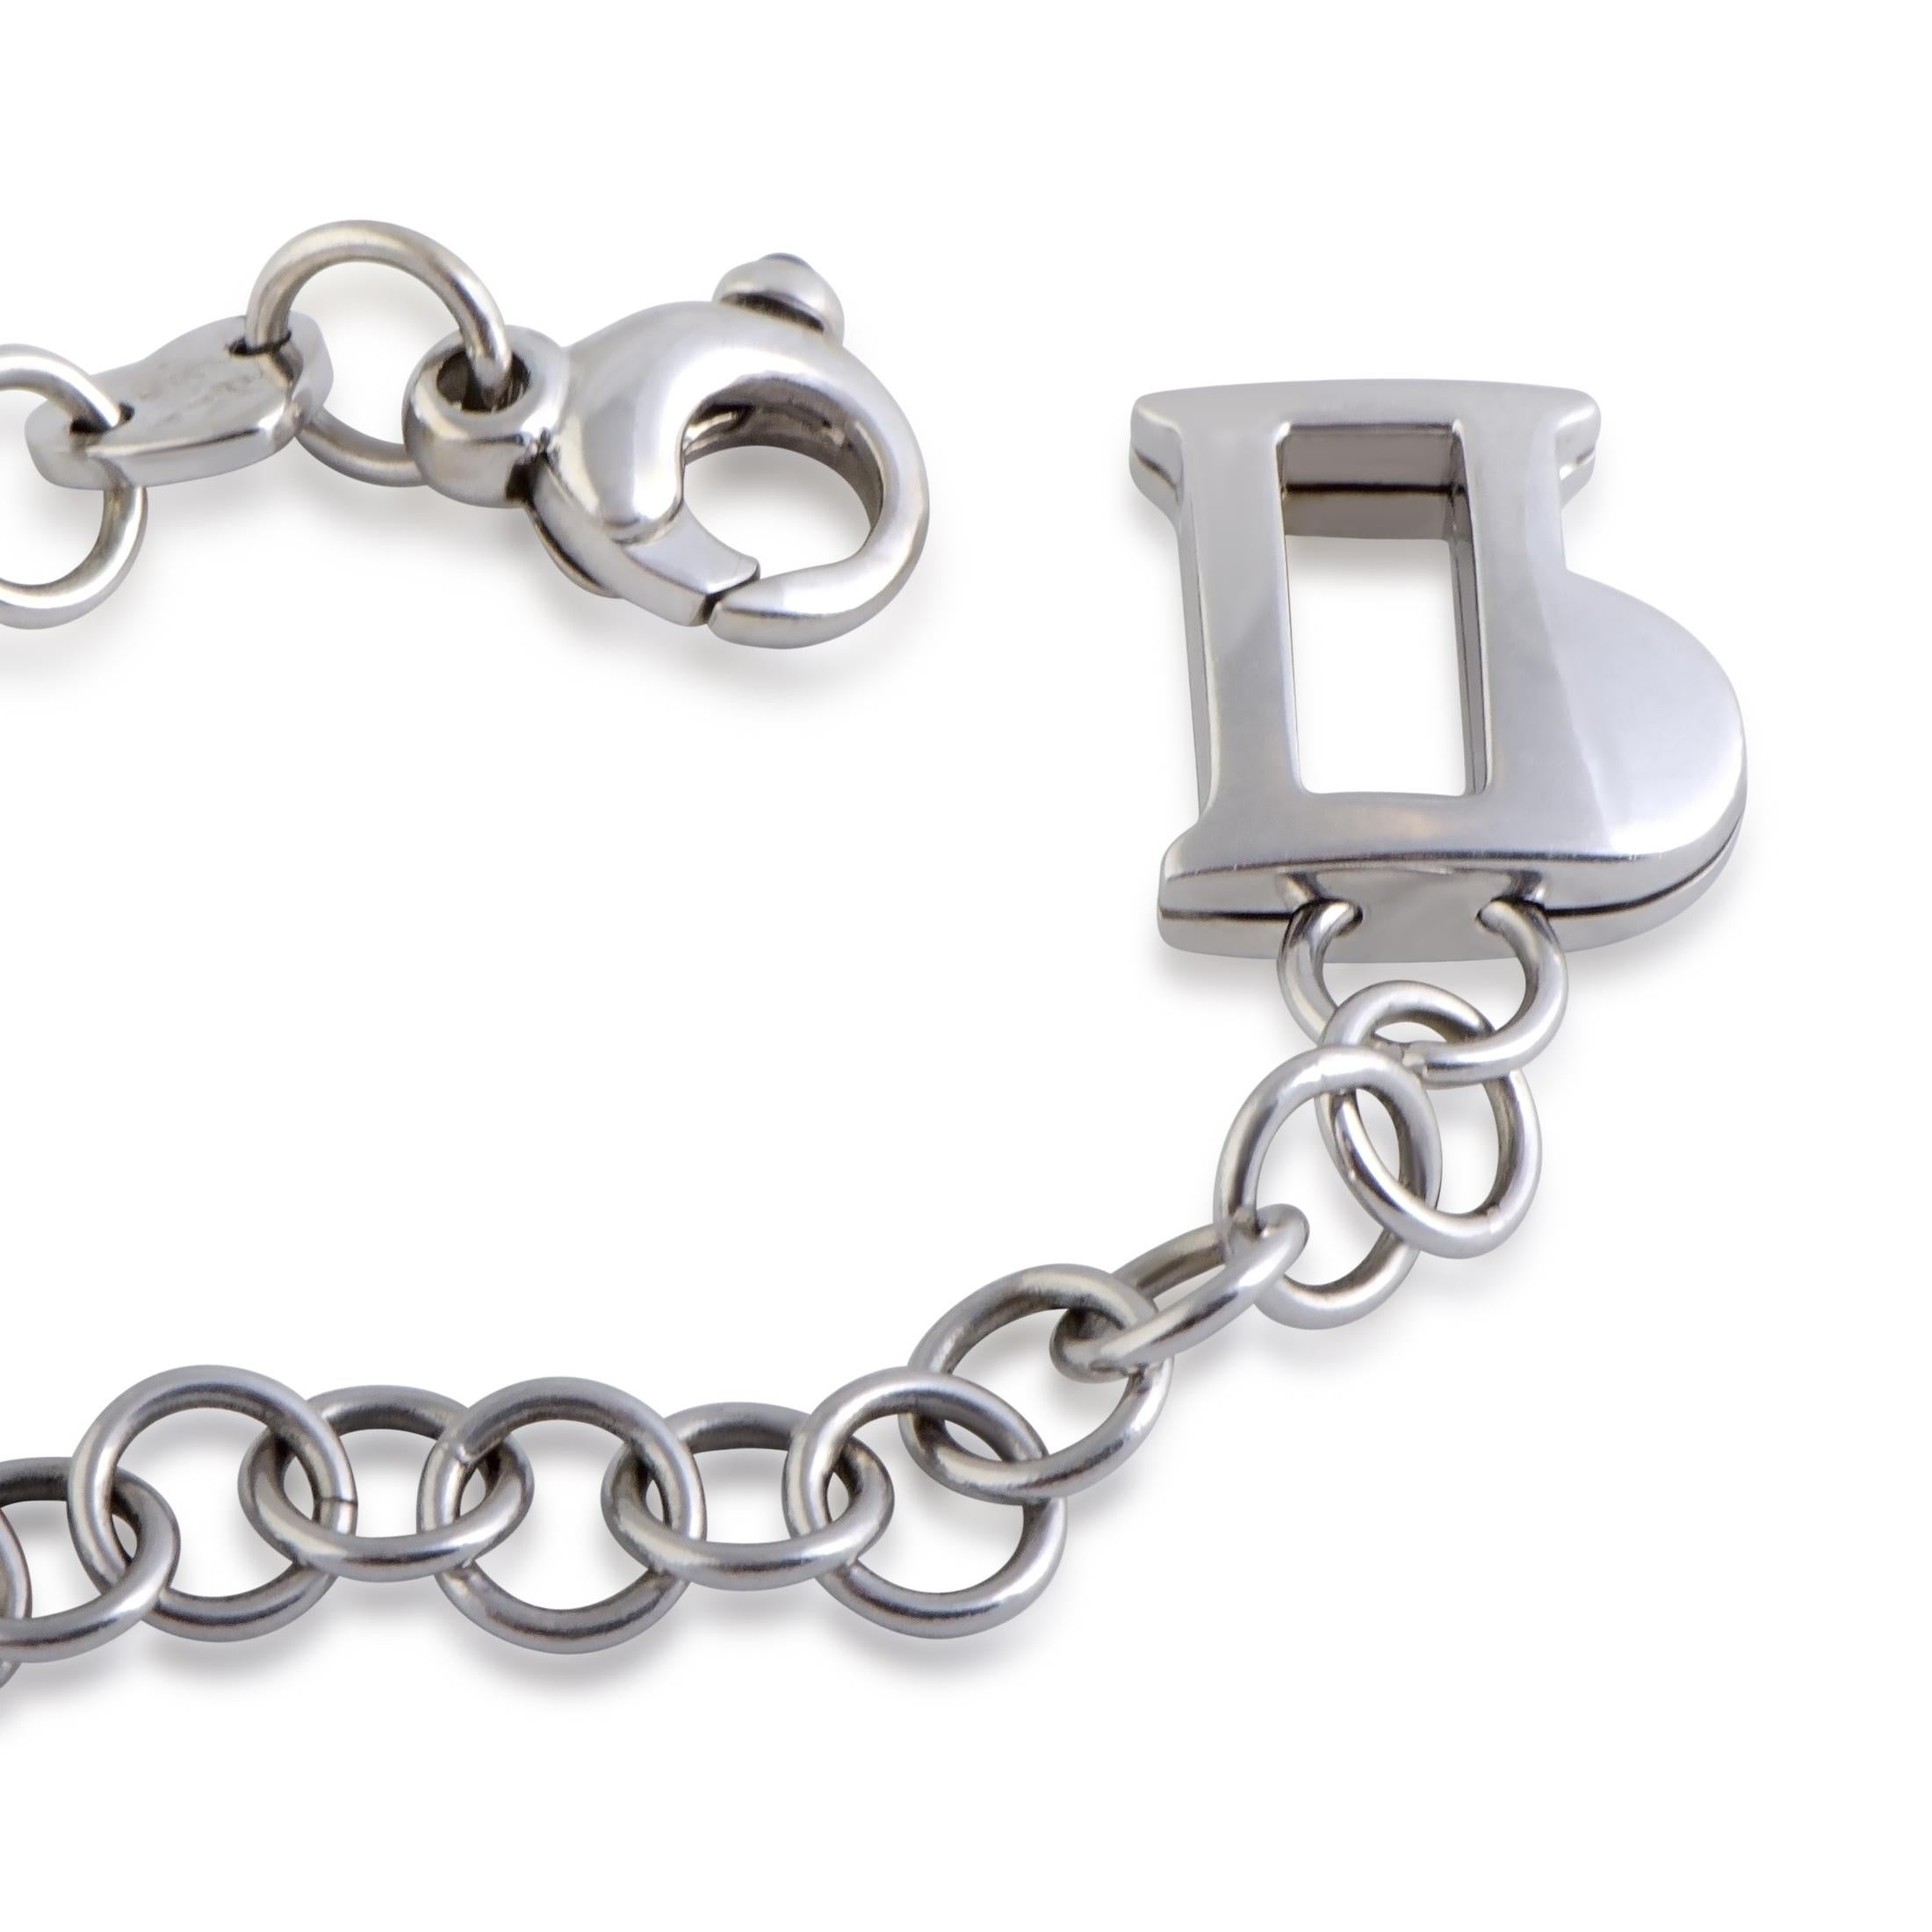 Attractively designed in glistening 18K white gold, this gorgeous charm bracelet by Pasquale Bruni is every woman's dream! The spectacular bracelet includes a charm embellished with 0.31ct of sparkling diamonds and provides ample space for multiple